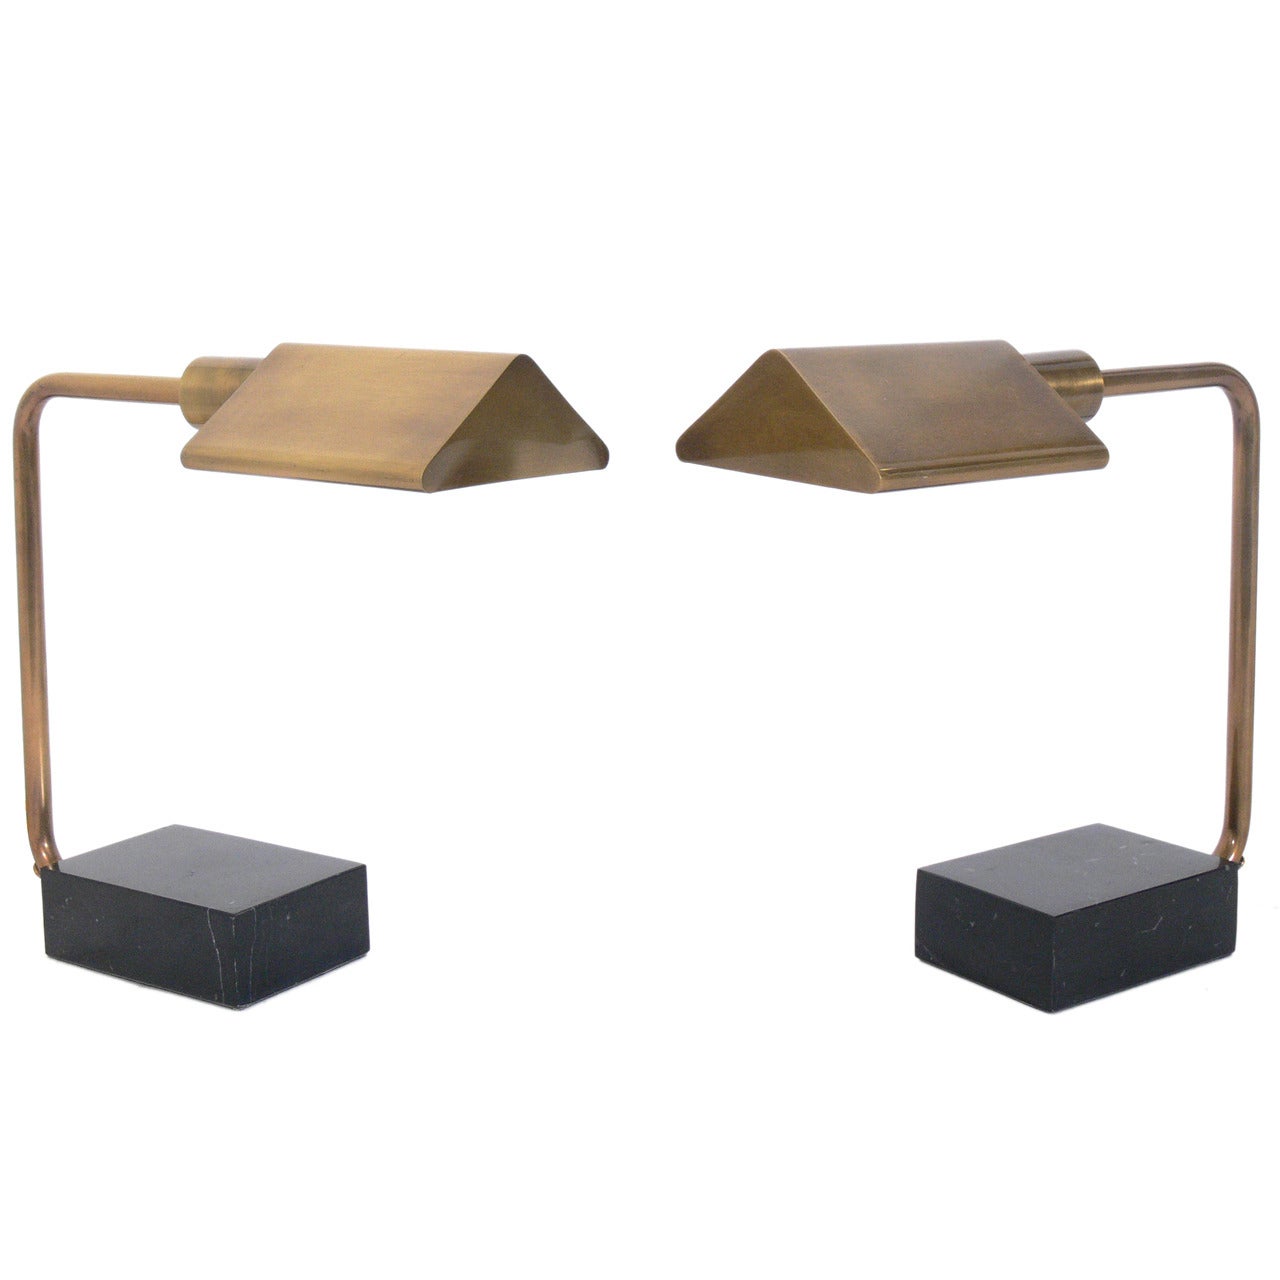 Pair of Modern Brass and Marble Lamps by Ralph Lauren